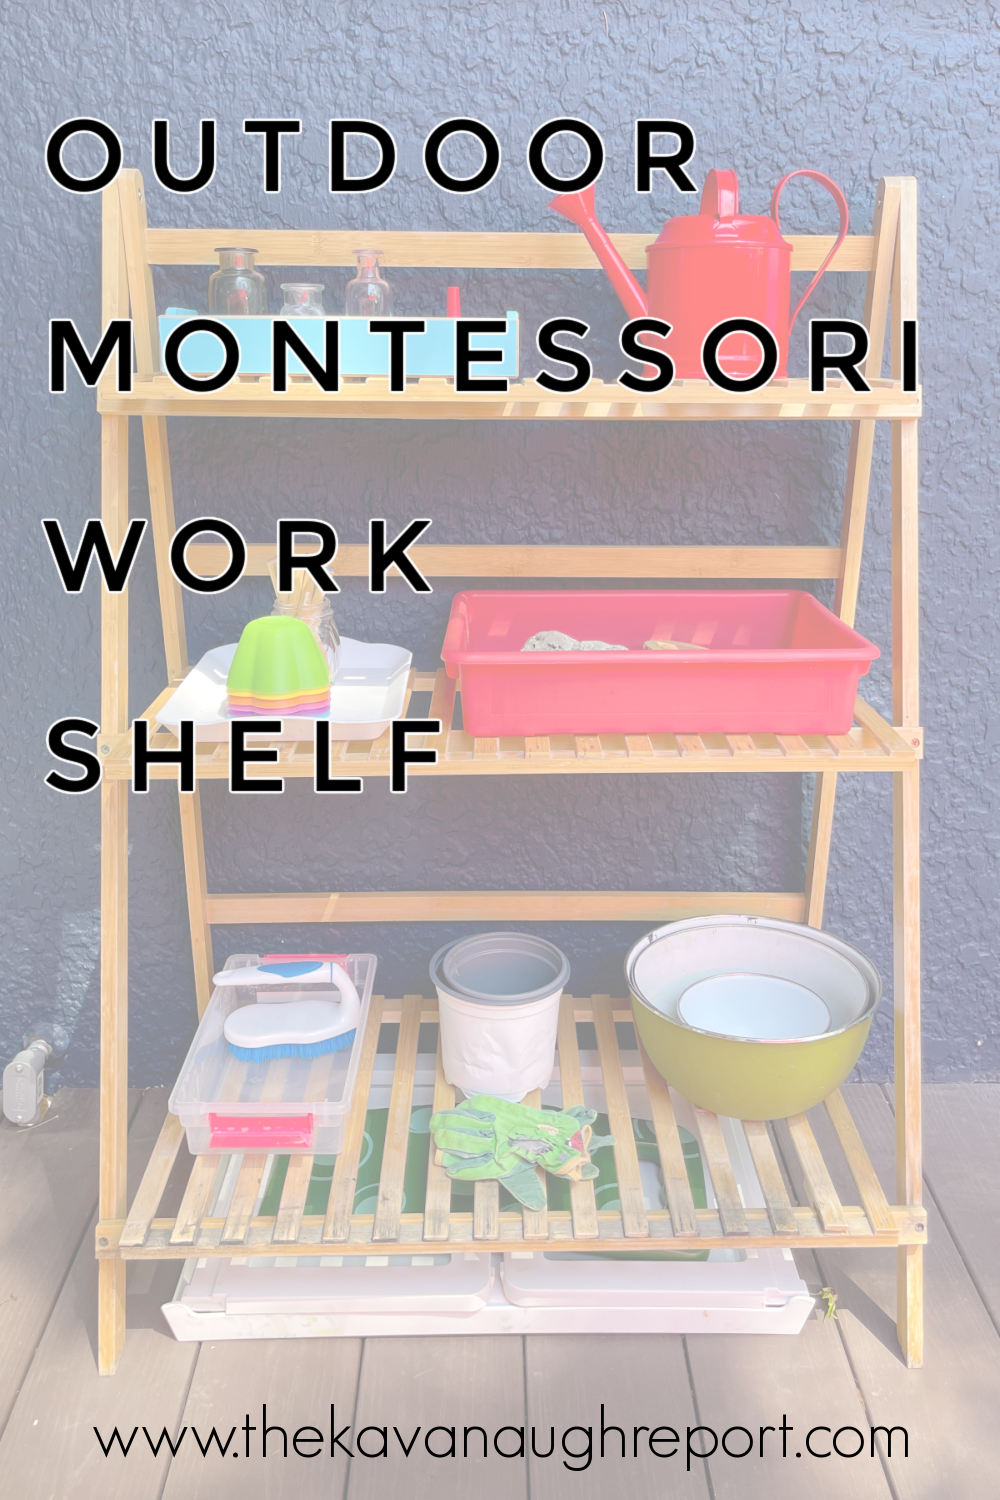 Montessori activity ideas for outdoor work shelves for preschoolers and toddlers. Easy, fun Montessori work for summer.